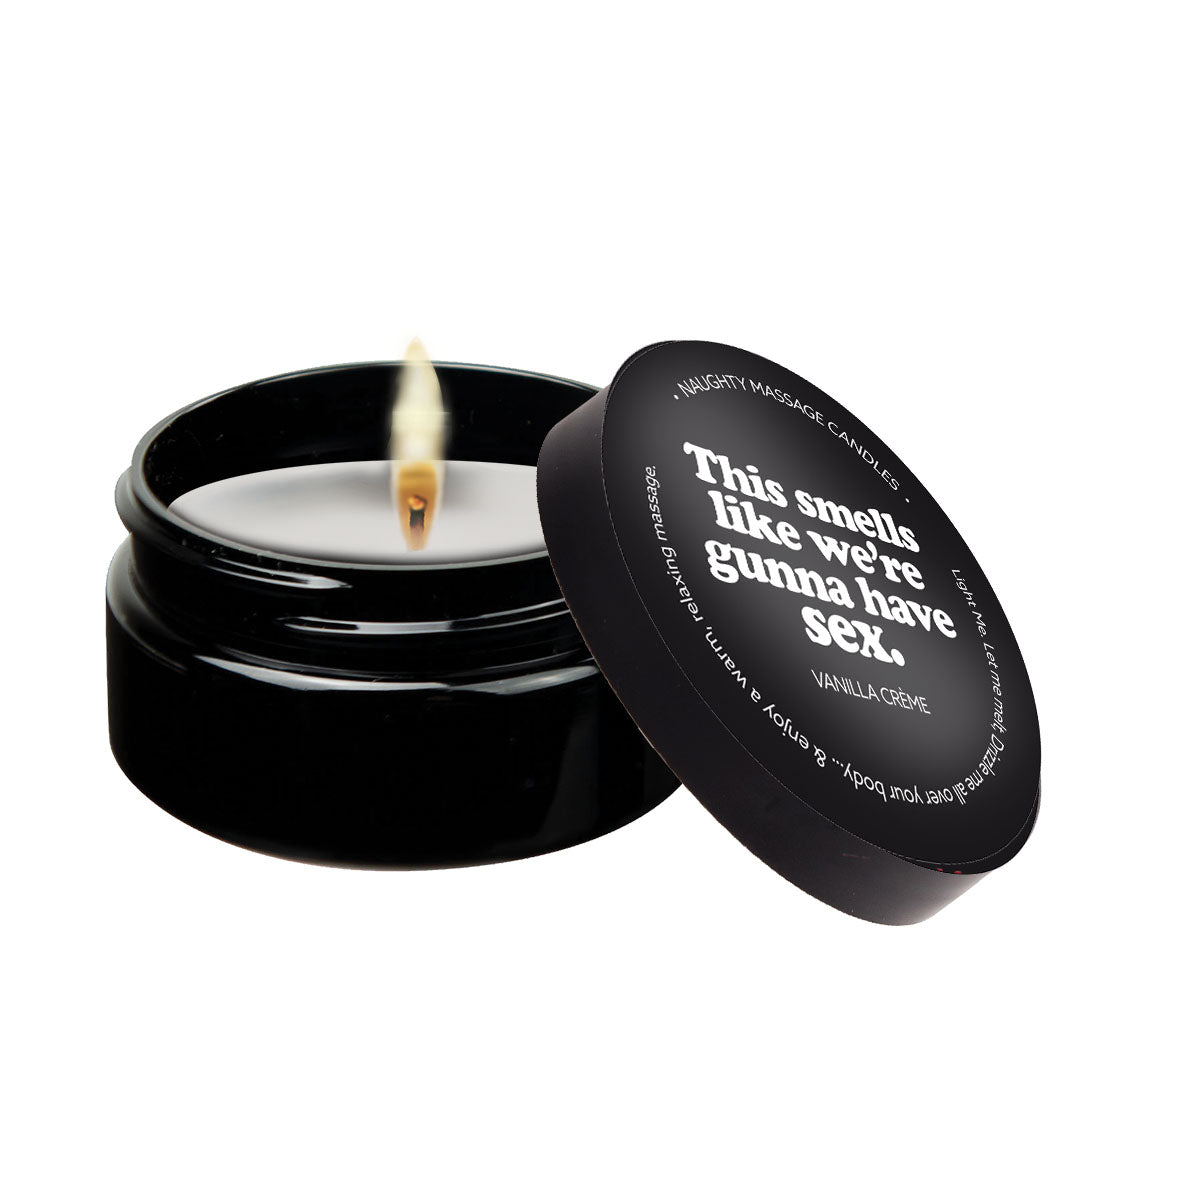 This Smells Like We're Gunna Have Sex - Naughty Mini Massage Candle